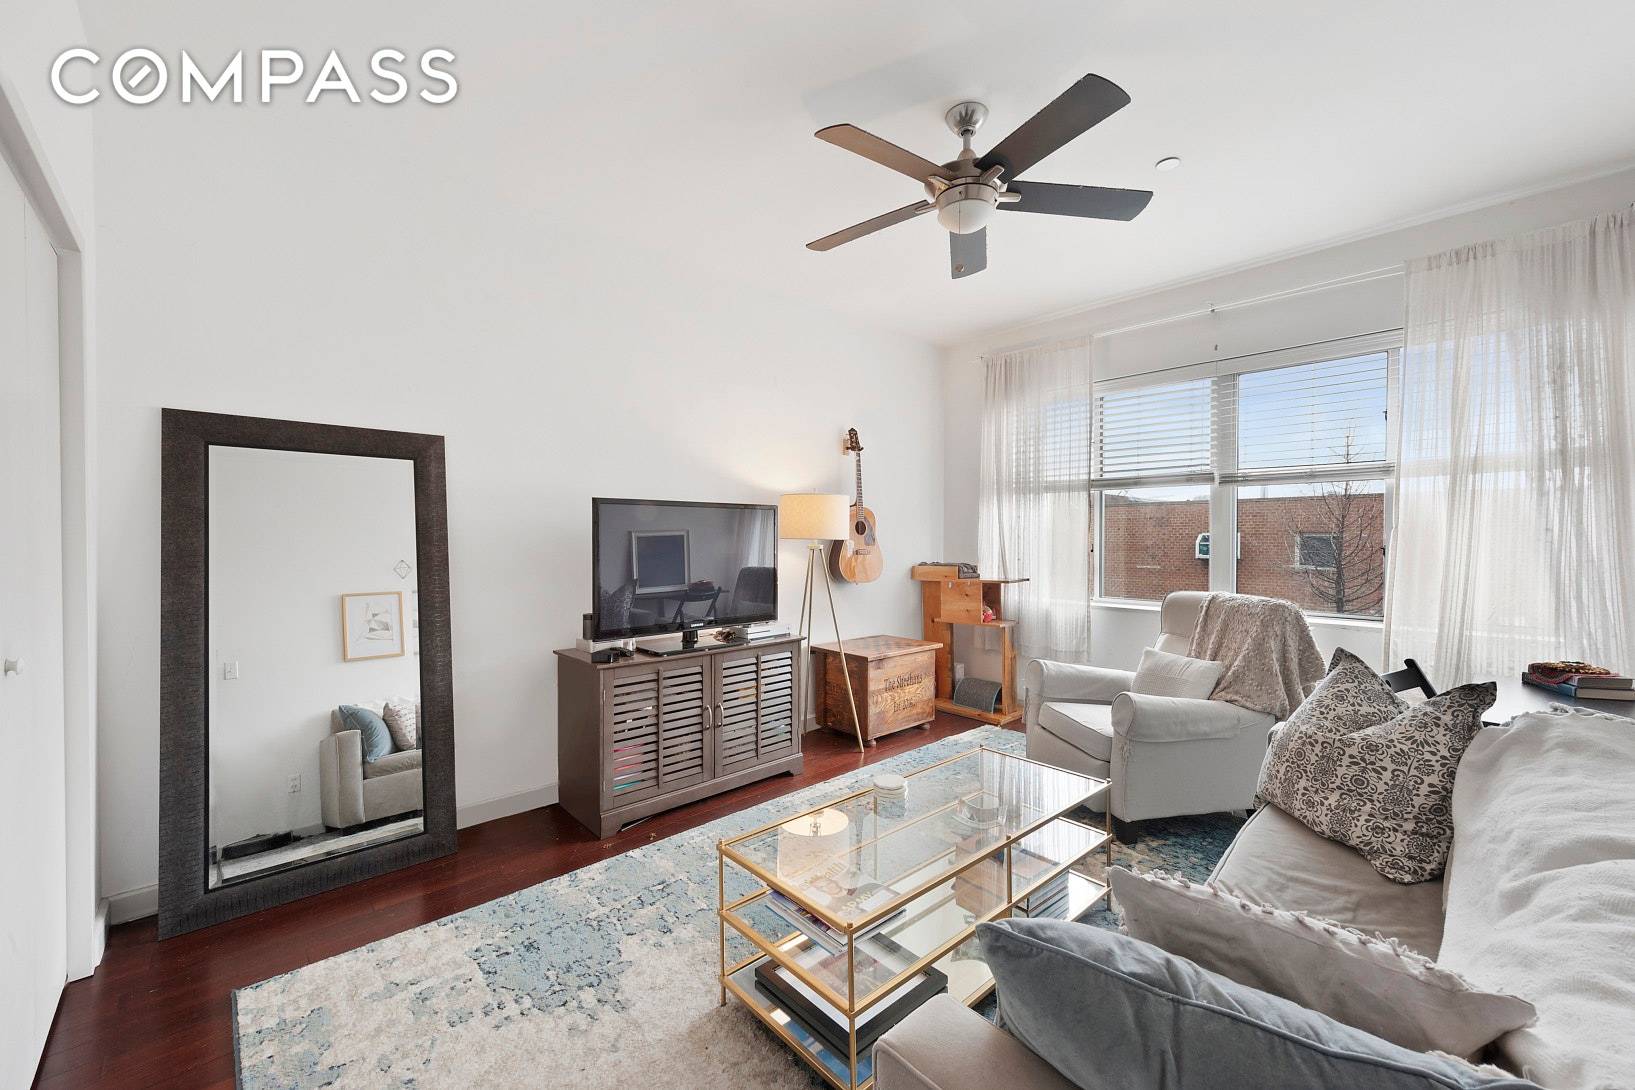 One bedroom Flex 2 bedroom for sale in super prime Bushwick The open kitchen features a custom kitchen island ideal for food prep and dining combo Washer Dryer in unit ...